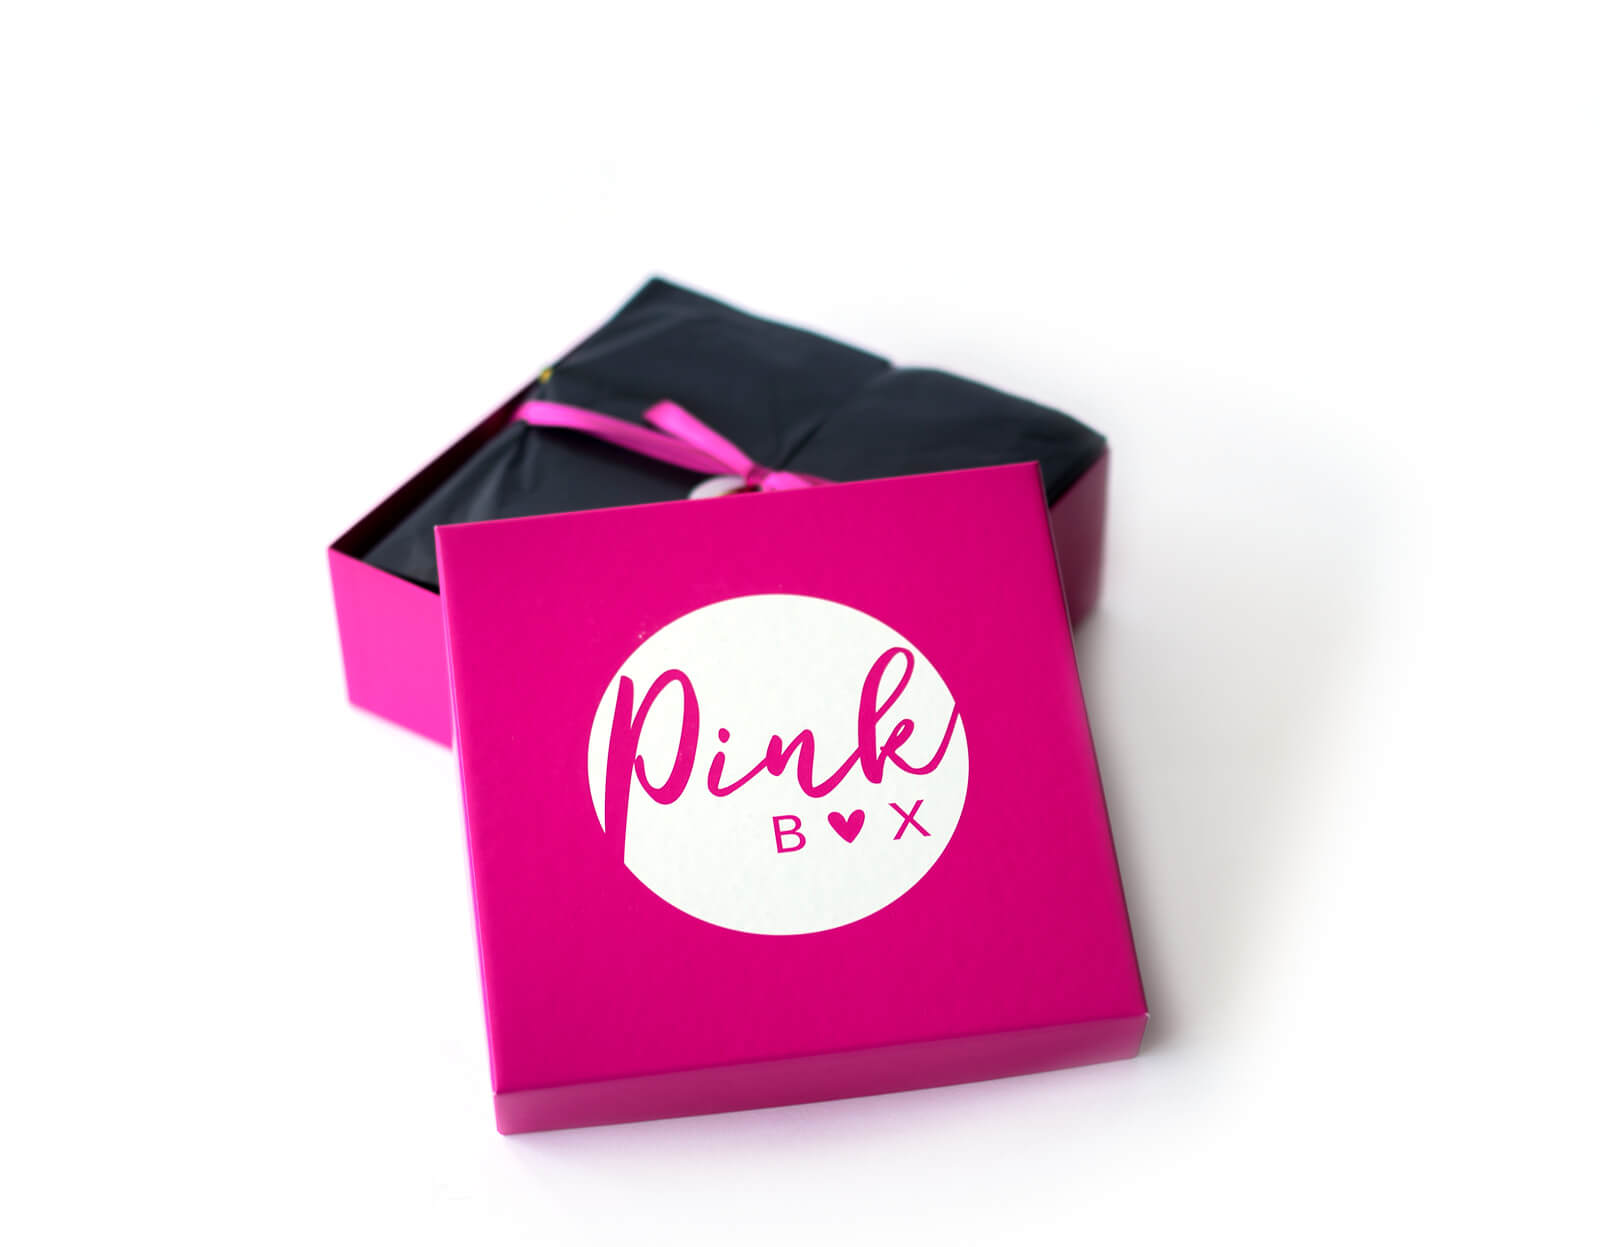 DIE PINK BOX im Juni 2020 – Pink Box Ready for Holiday 2020